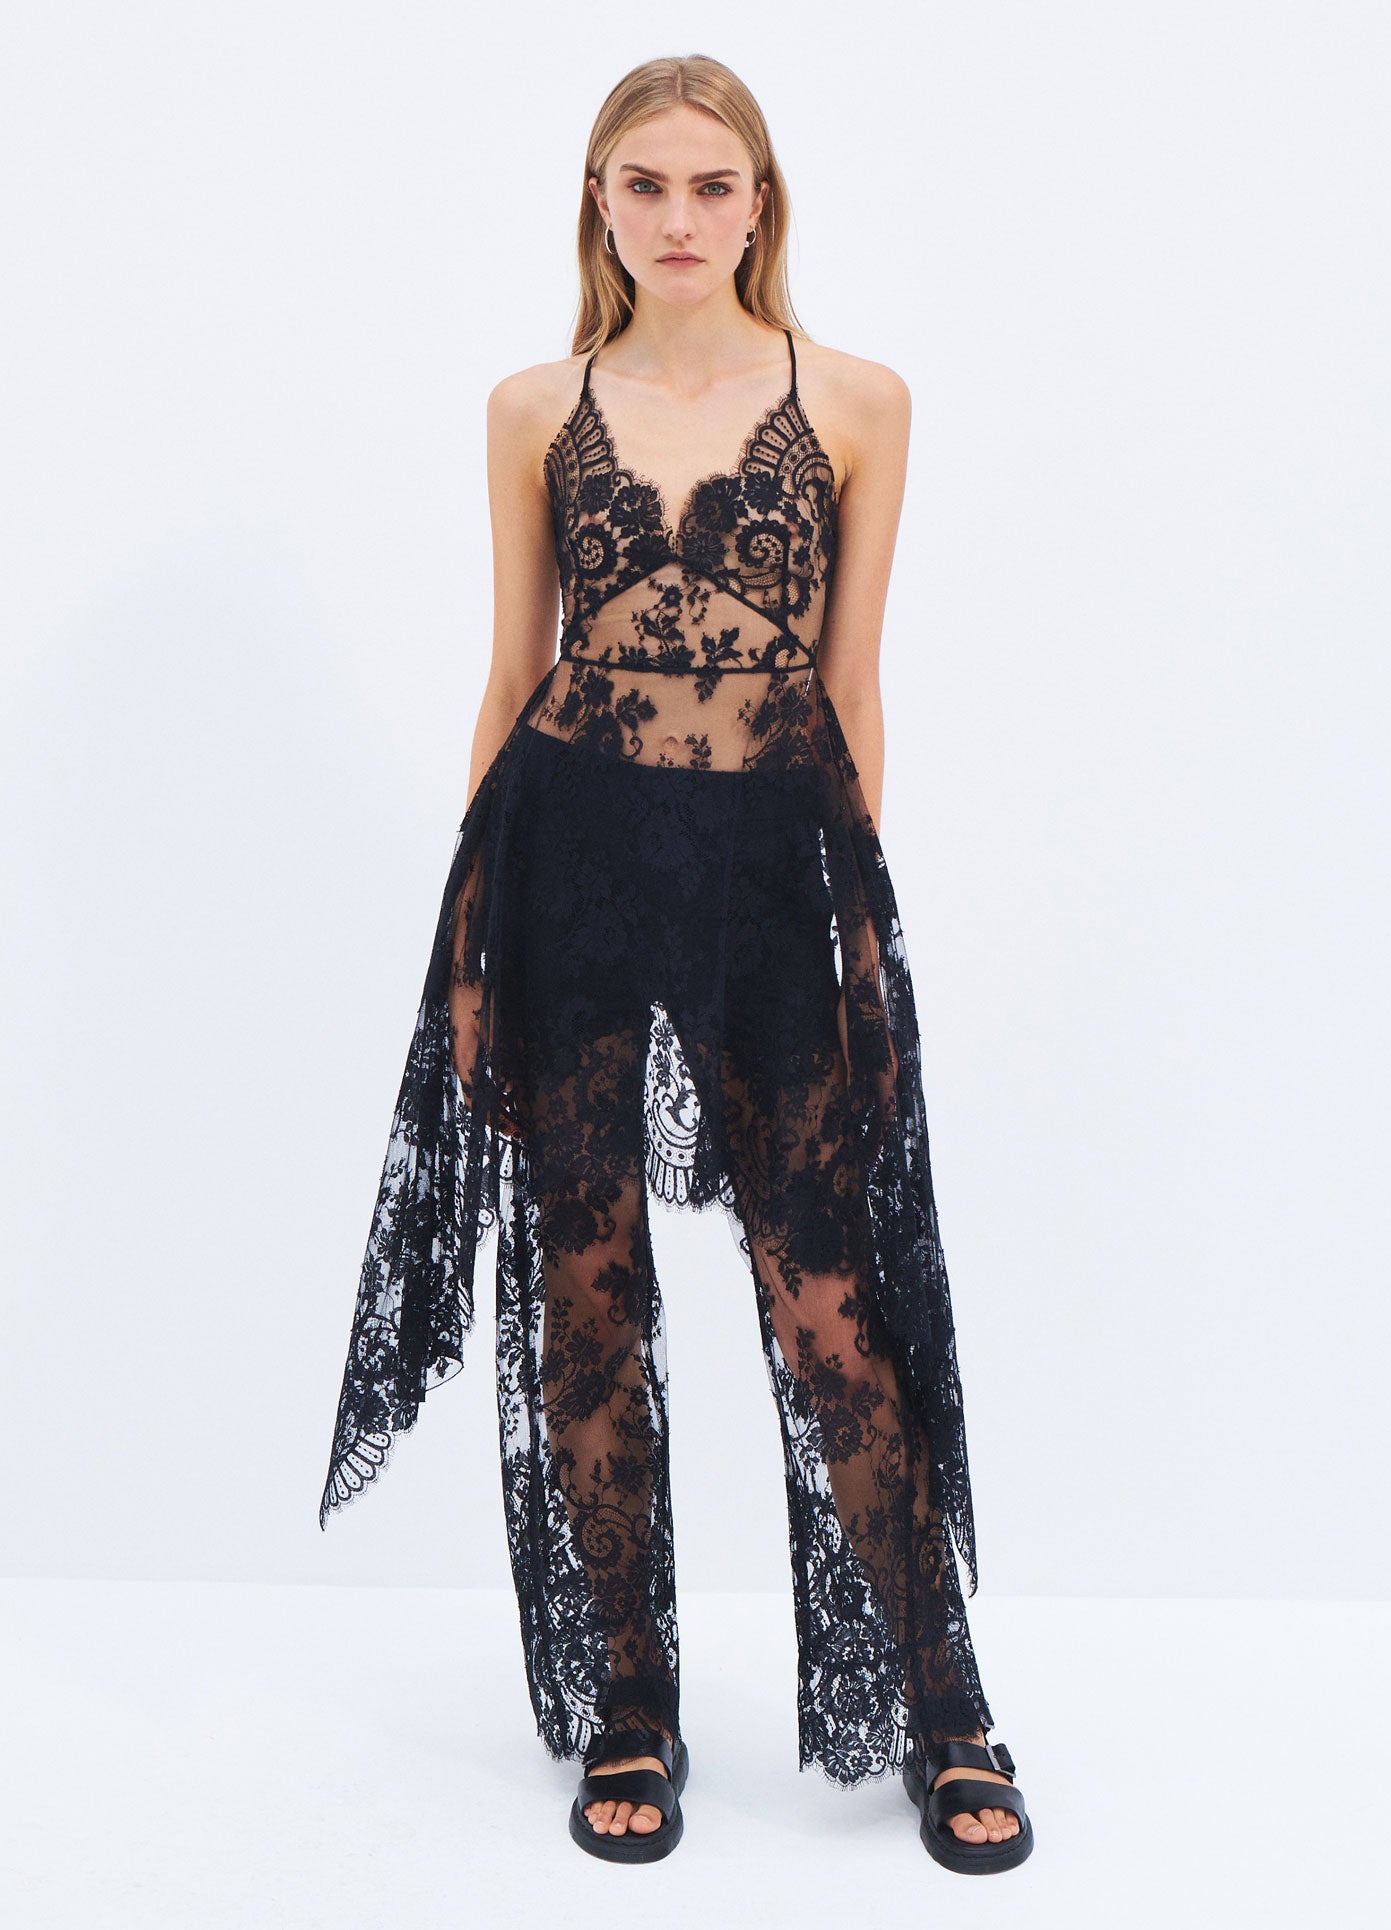 MONSE Spring 2024 Floral Lace Pant in Black on model full front view